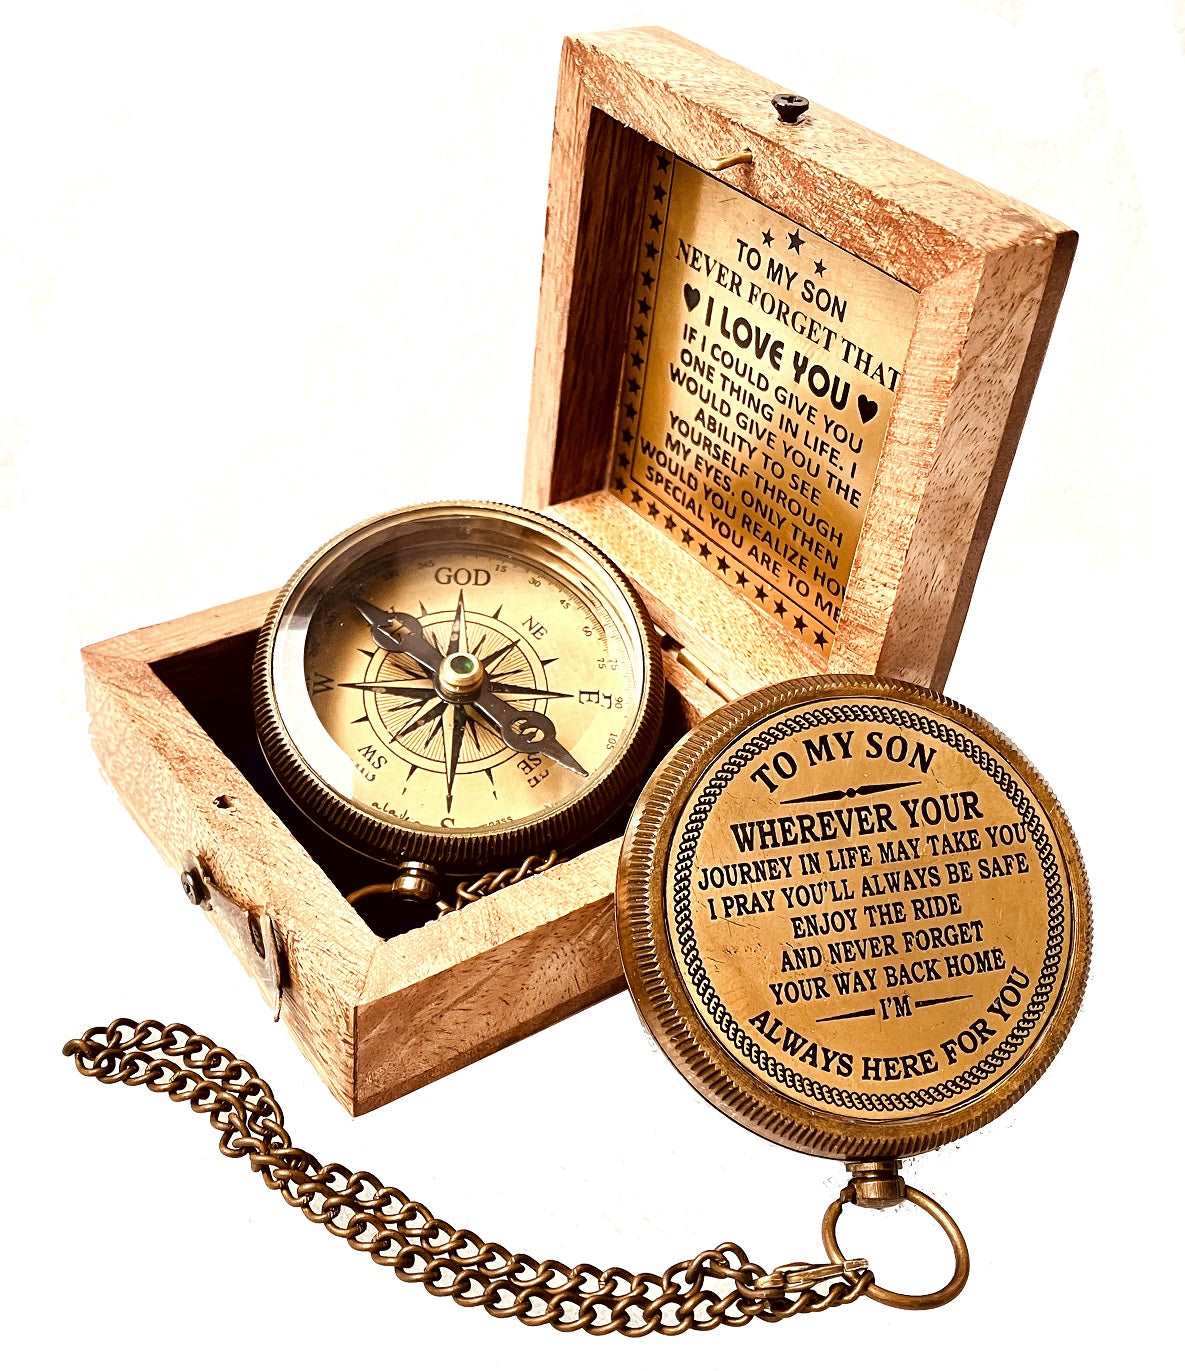 Inspiration gift for son from mom dad - Engraved compass with meaningful quote